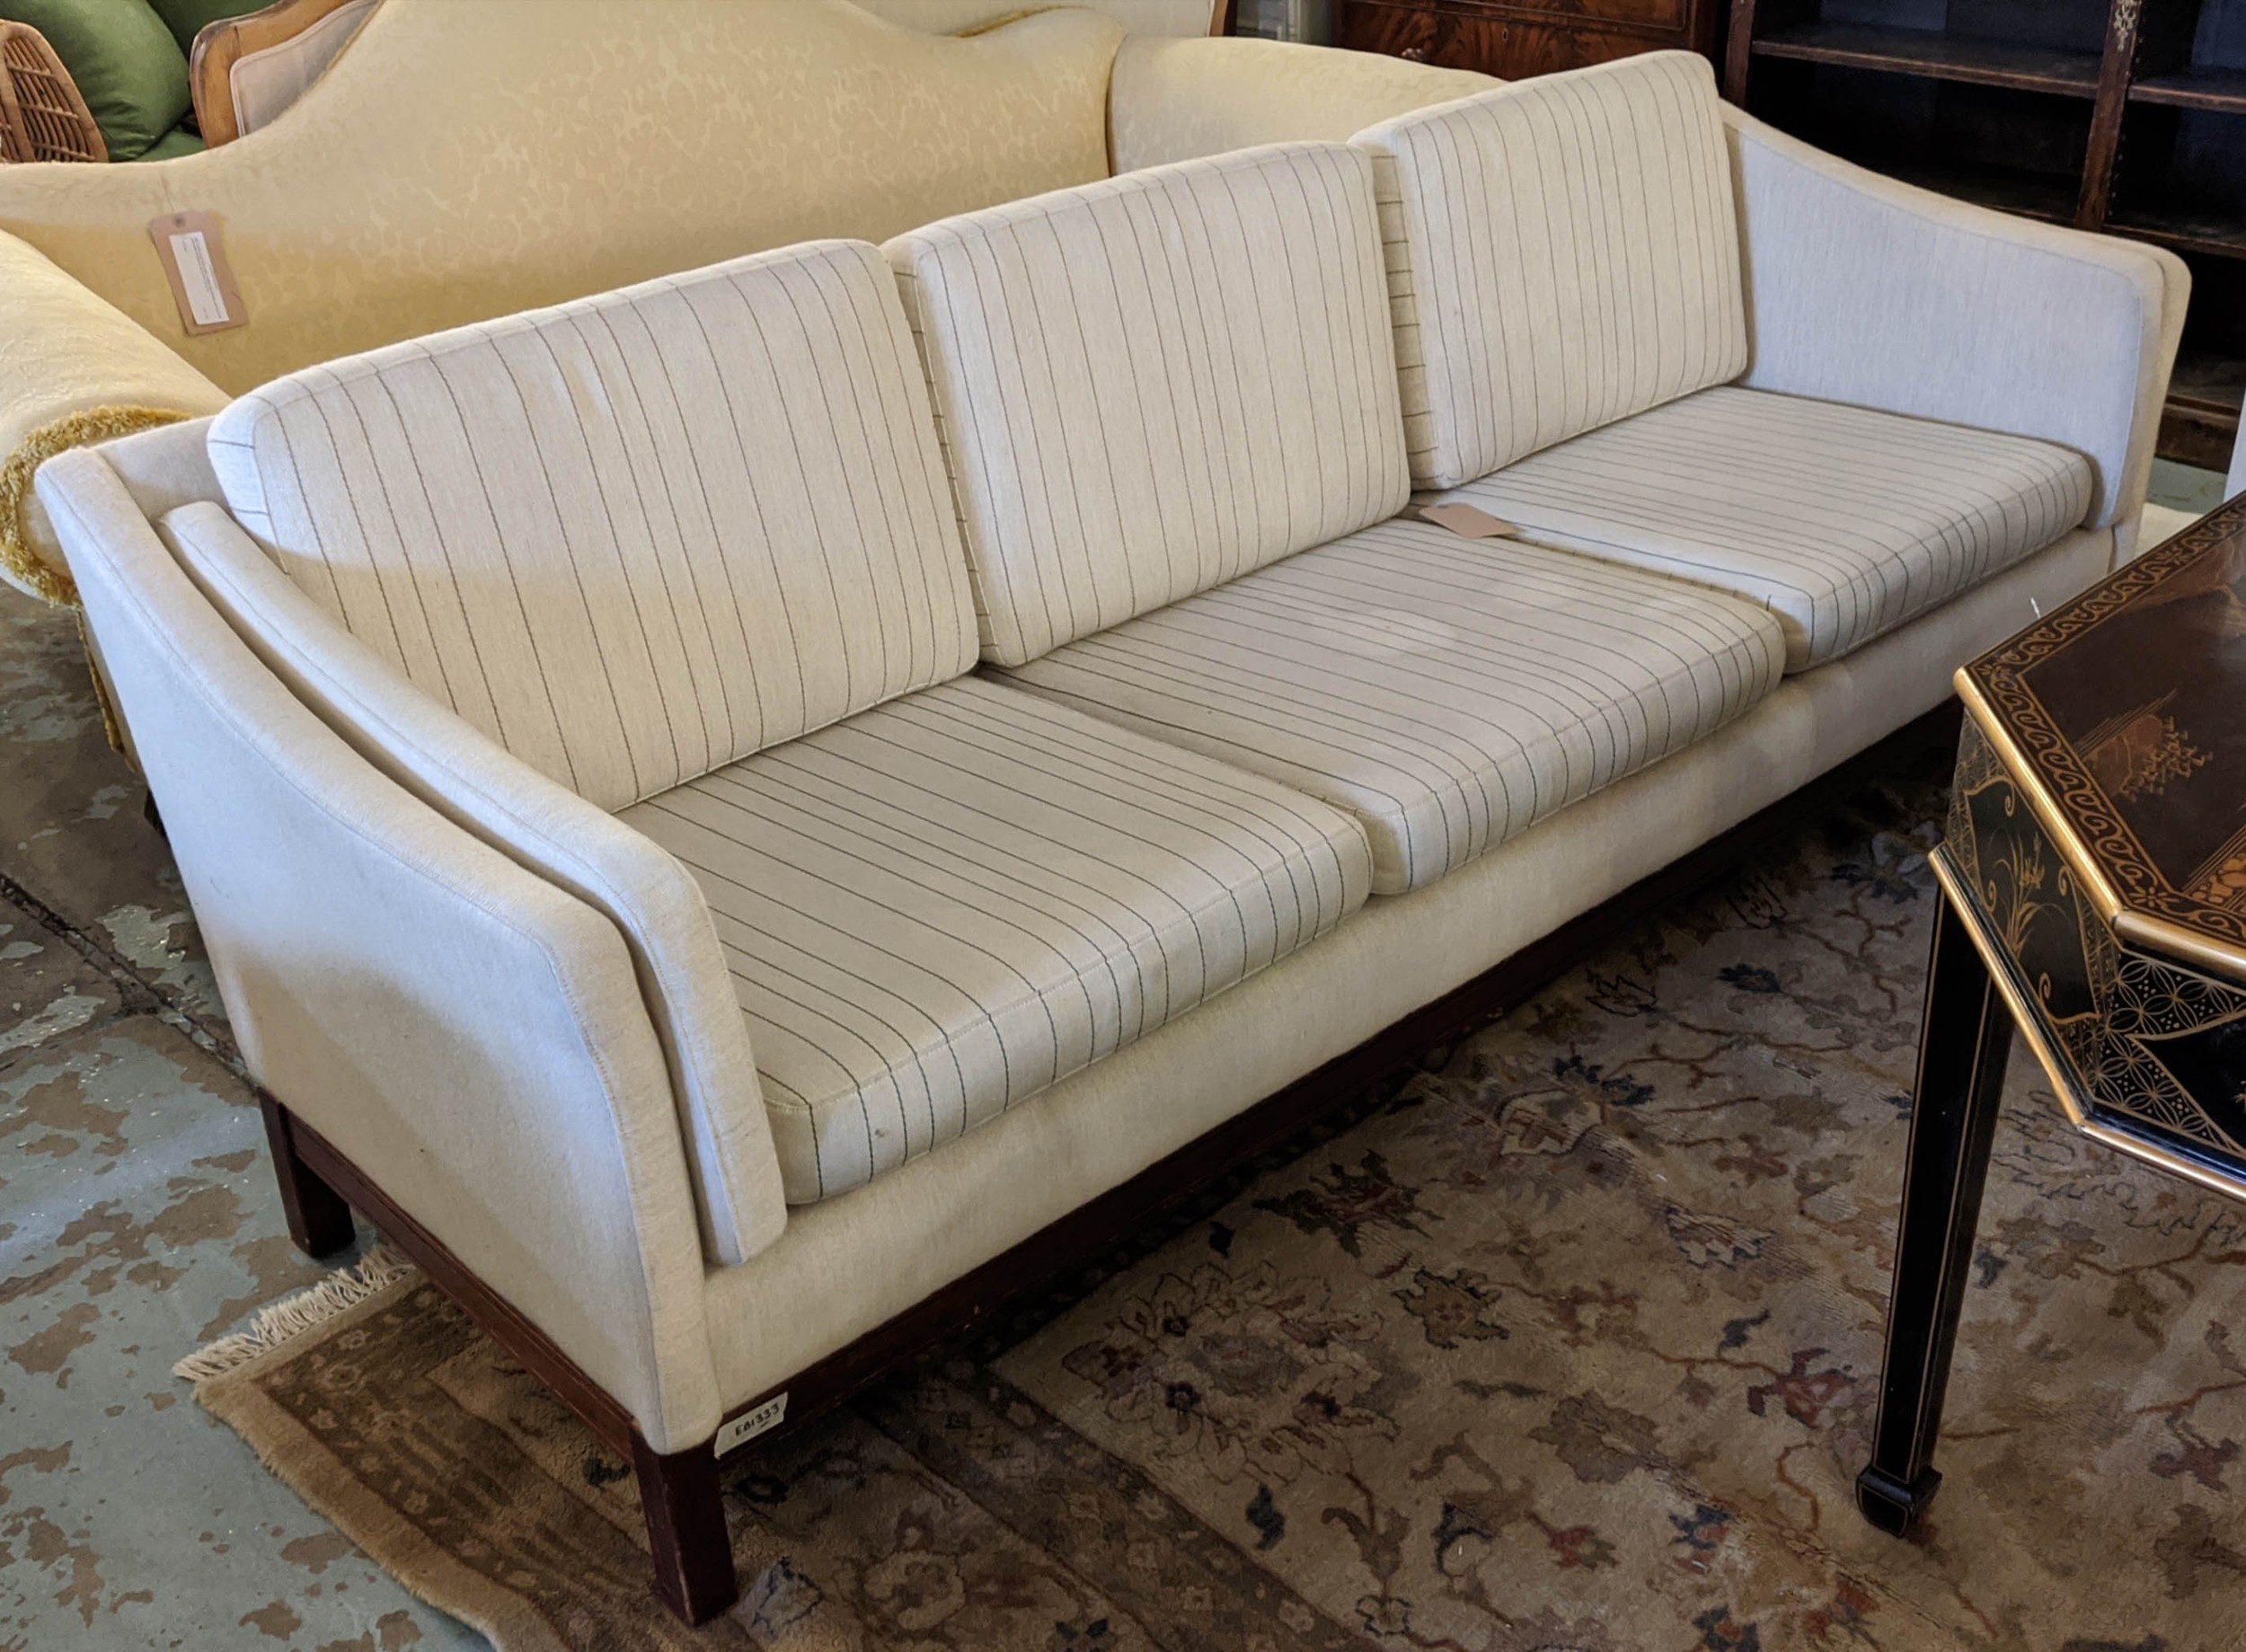 SOFA, 224cm striped upholstery. (fabric needs cleaning)